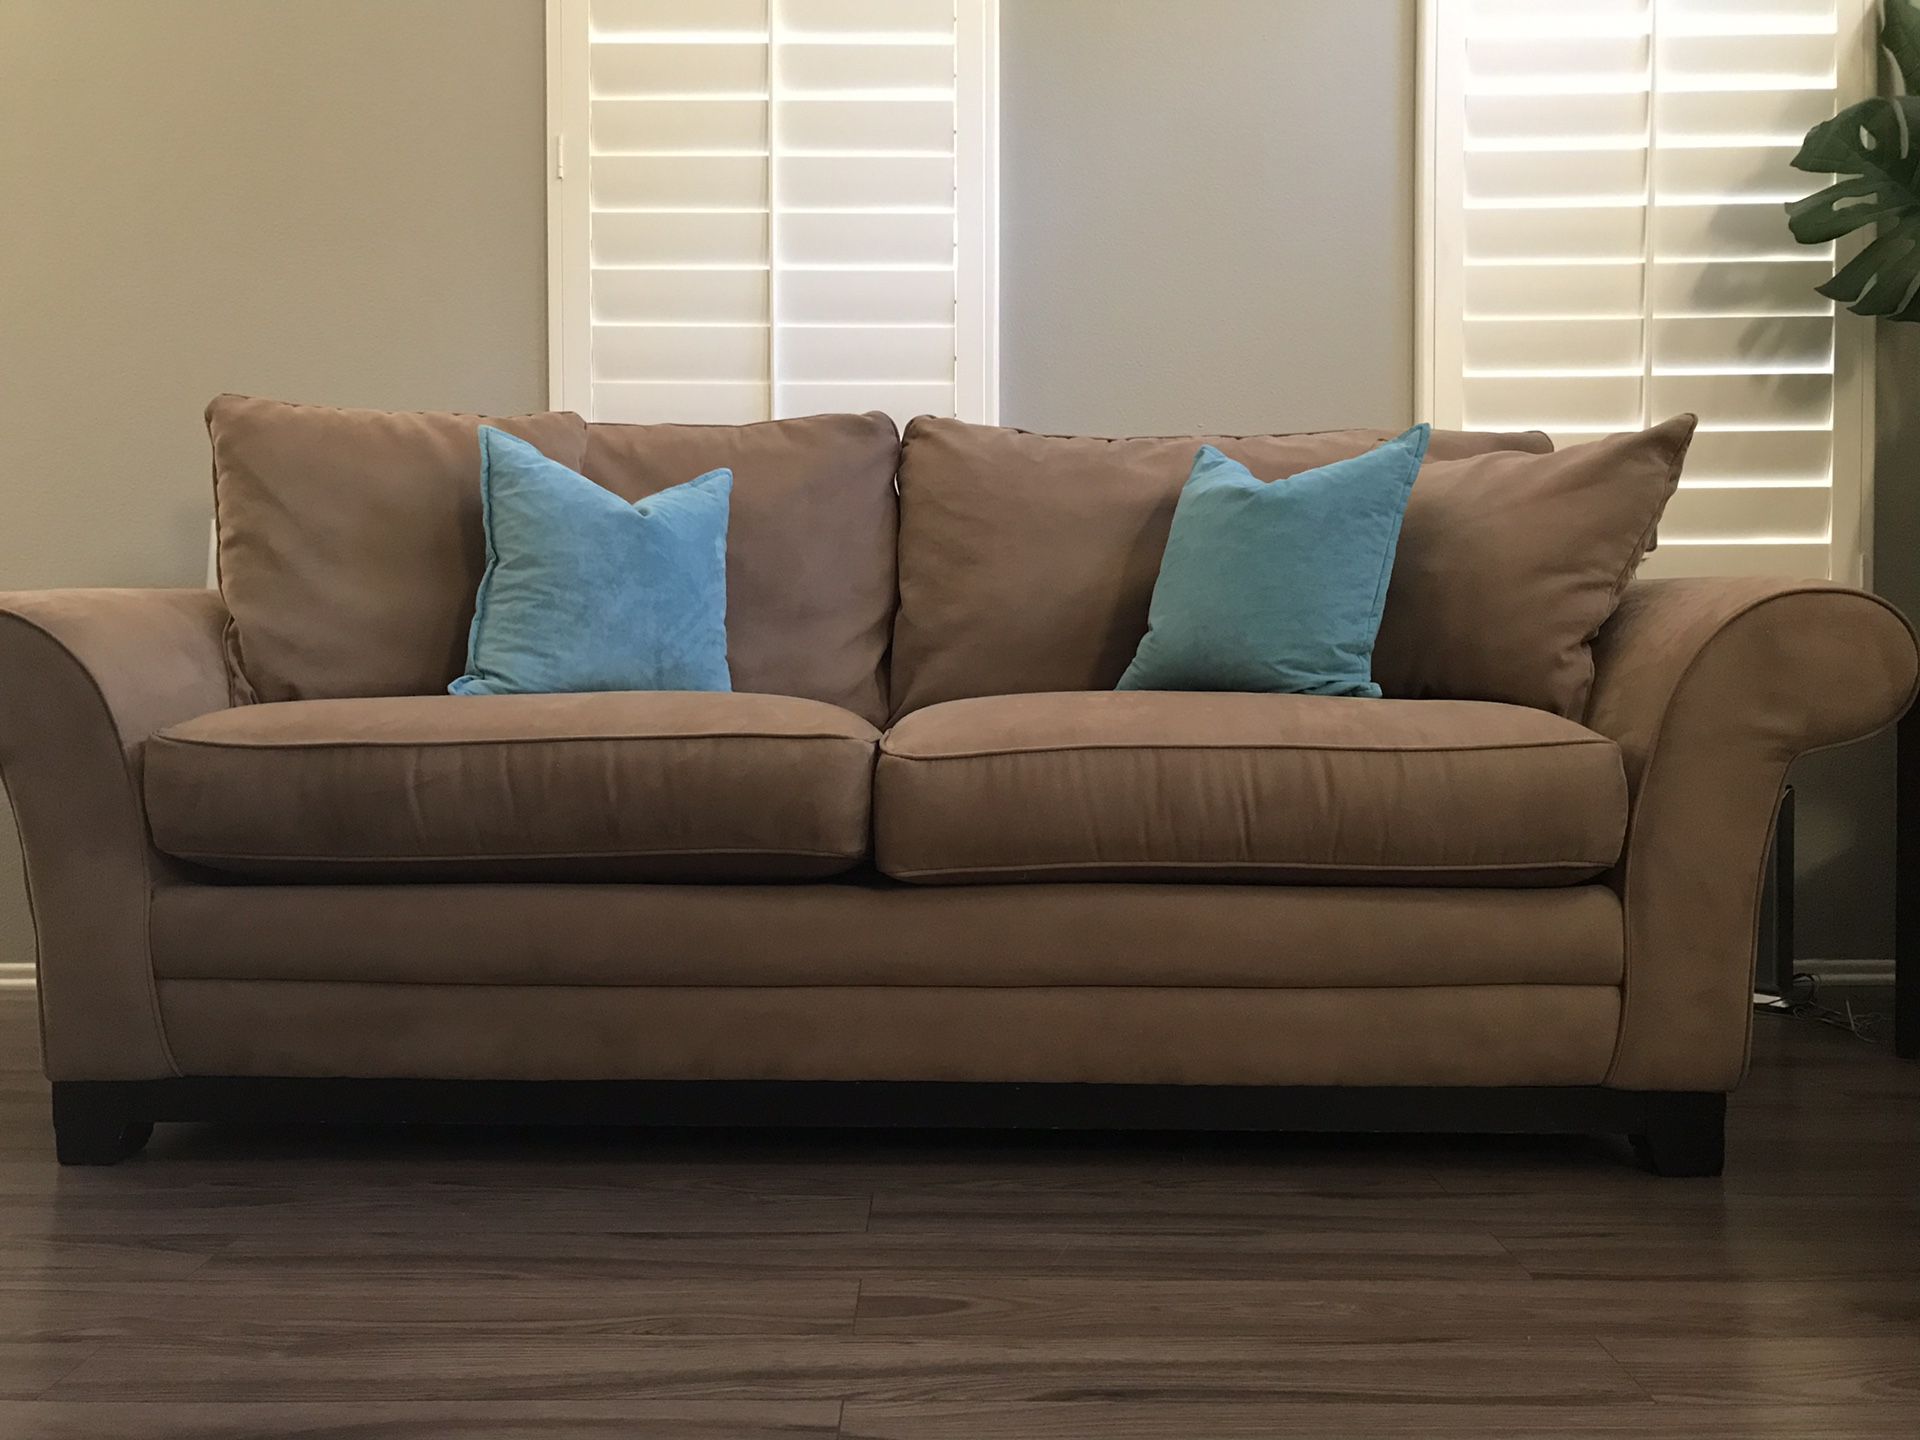 Sofa and loveseat in excellent condition. Super clean! You must be able to pick these up as we cannot deliver.